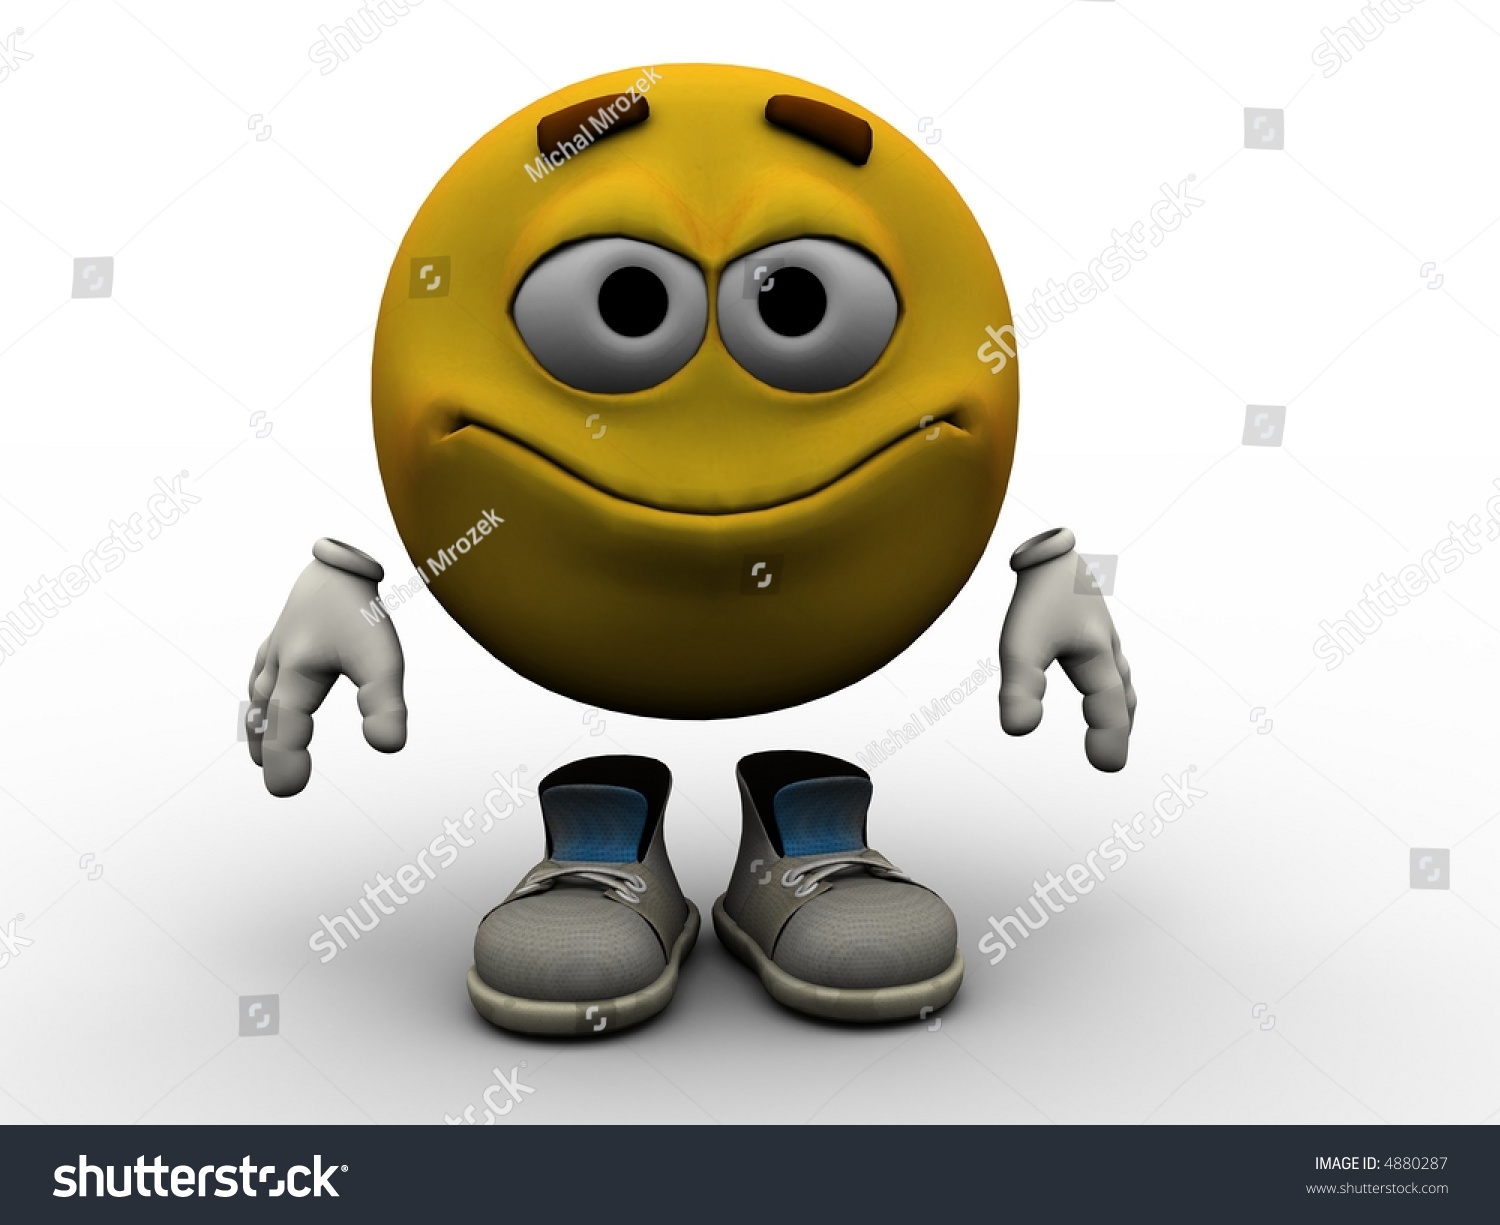 Smiling Emoticon - Rendered Picture Of That Popular Yellow Emoticon ...